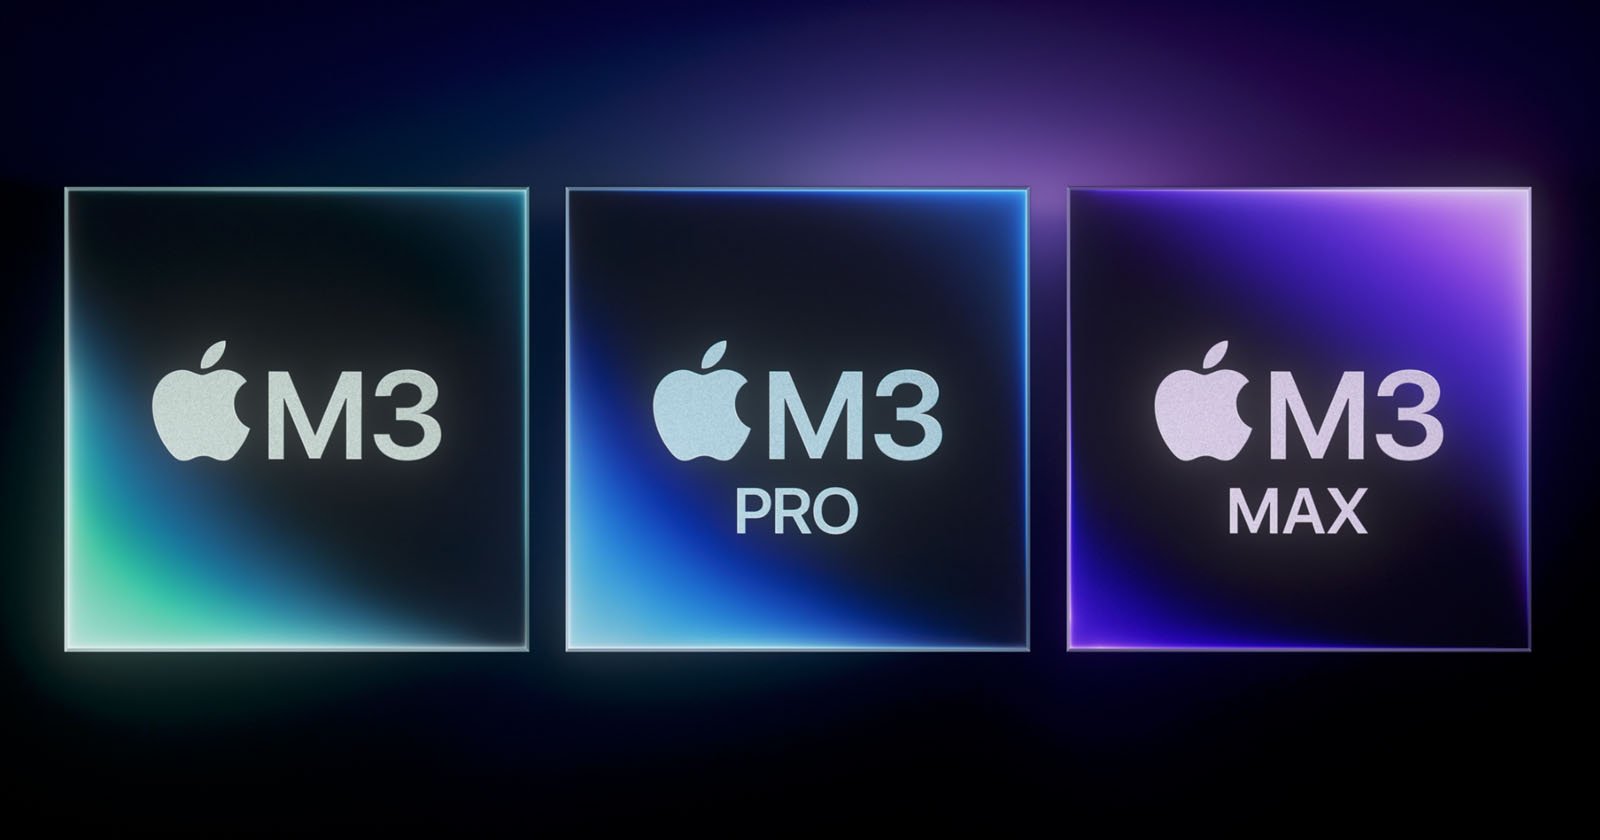 Apple Debuts M3 Chips, Companys First to Use Three-Nanometer Tech